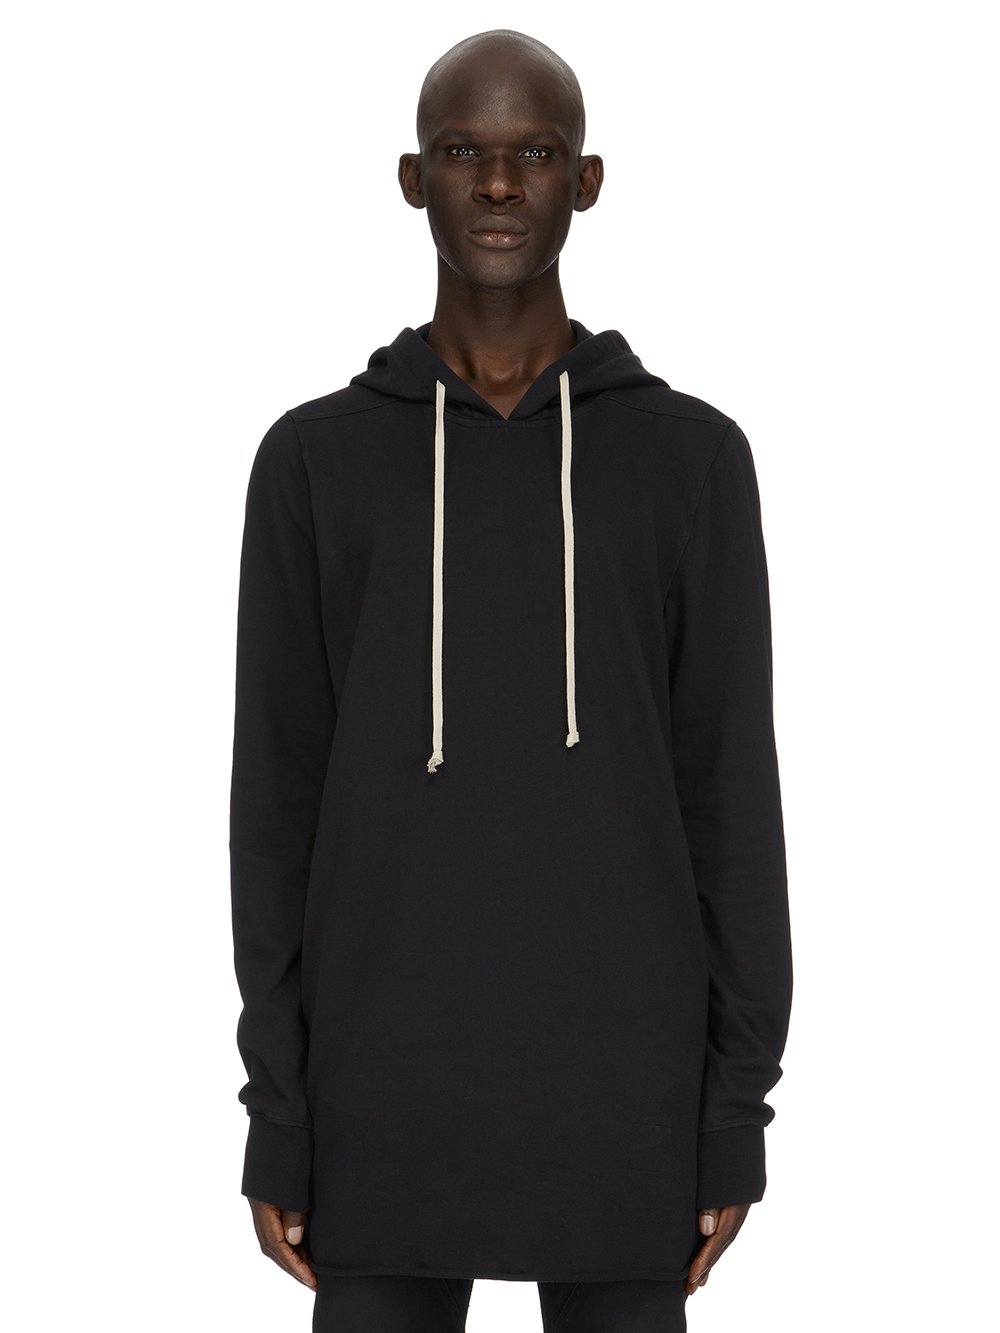 DRKSHDW FW23 LUXOR PULLOVER HOODIE IN BLACK COMPACT HEAVY COTTON JERSEY